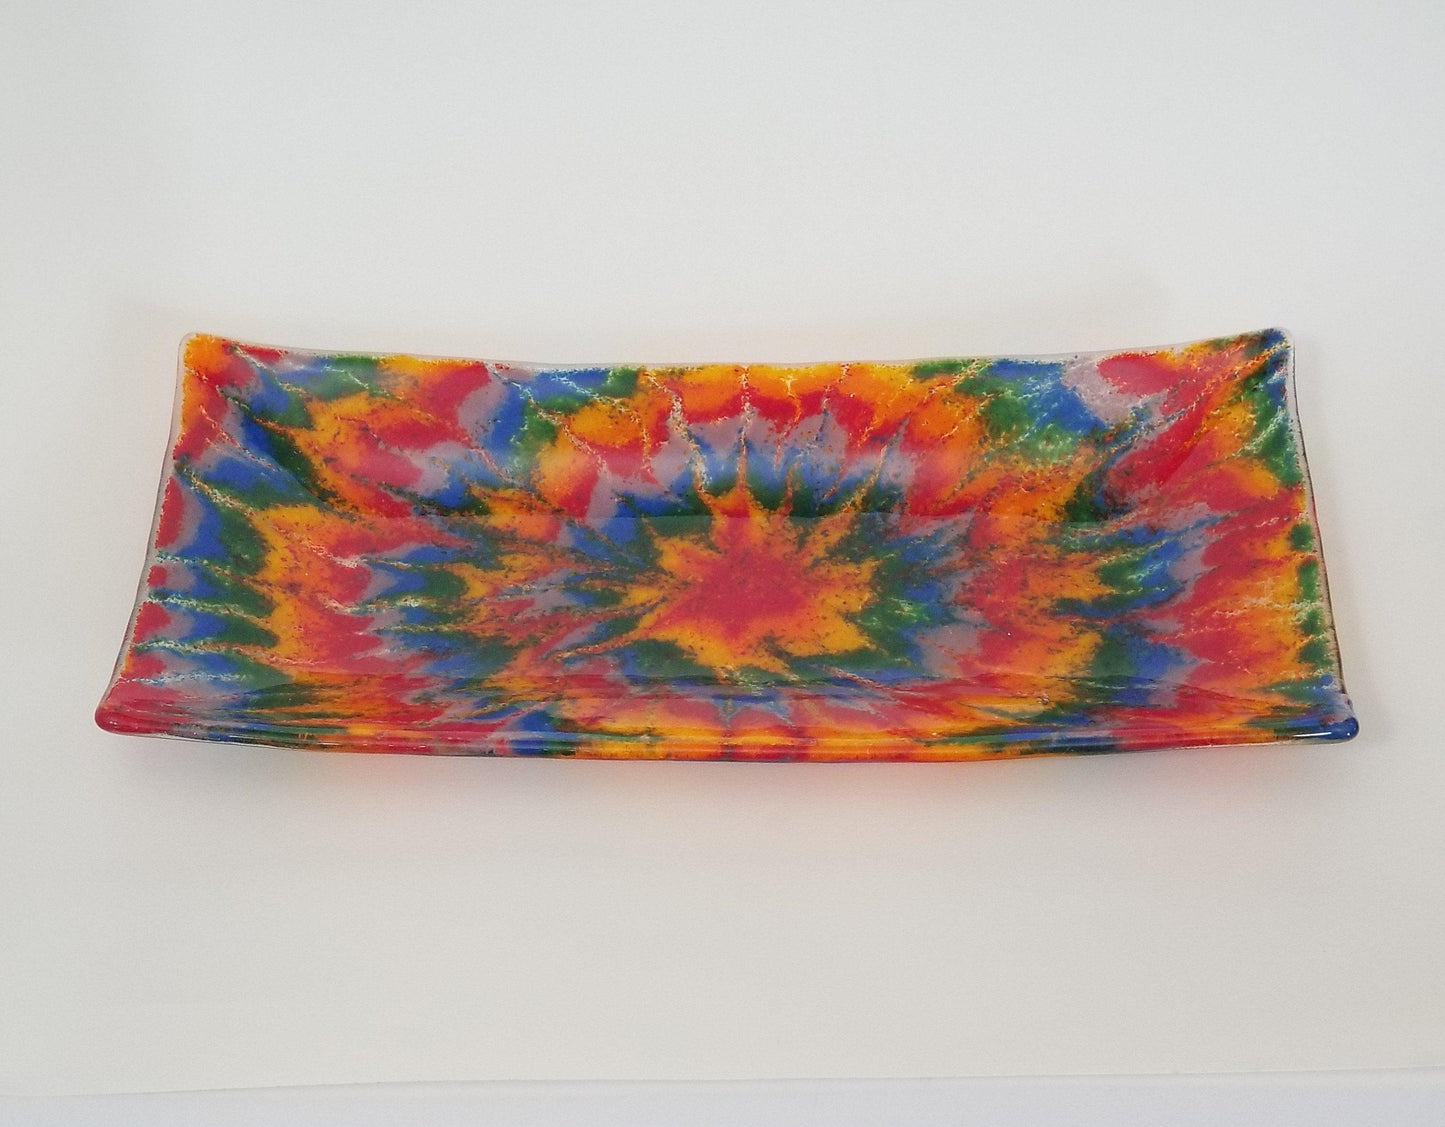 Tie Dye look serving plate fused glass 10 inches, Rainbow Colors, seeds glassworks, seedsglassworks